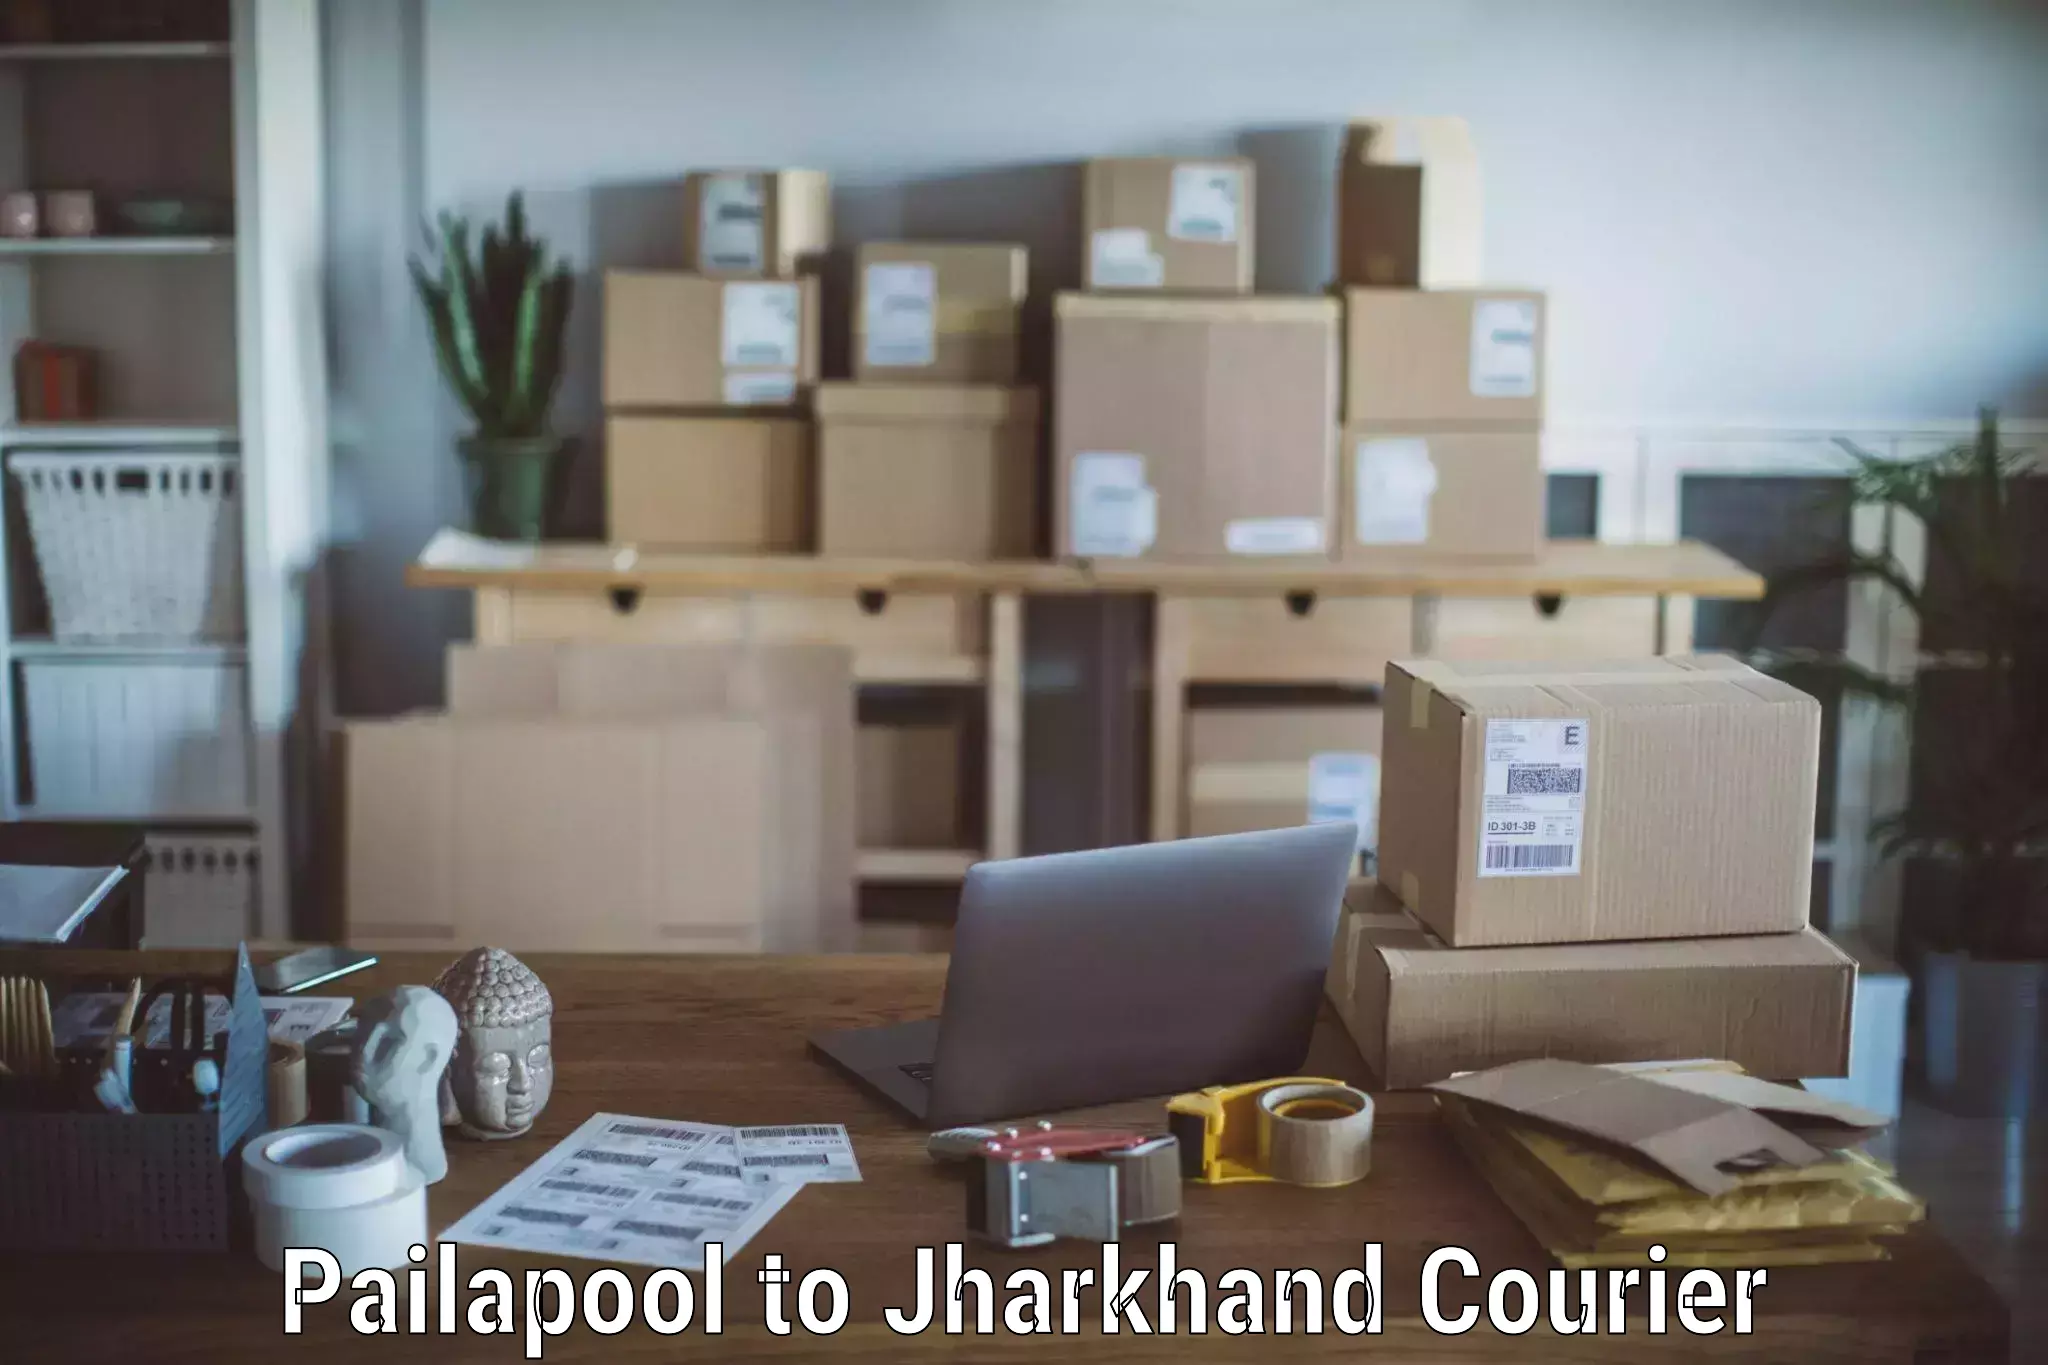 Trusted moving company Pailapool to Jamshedpur